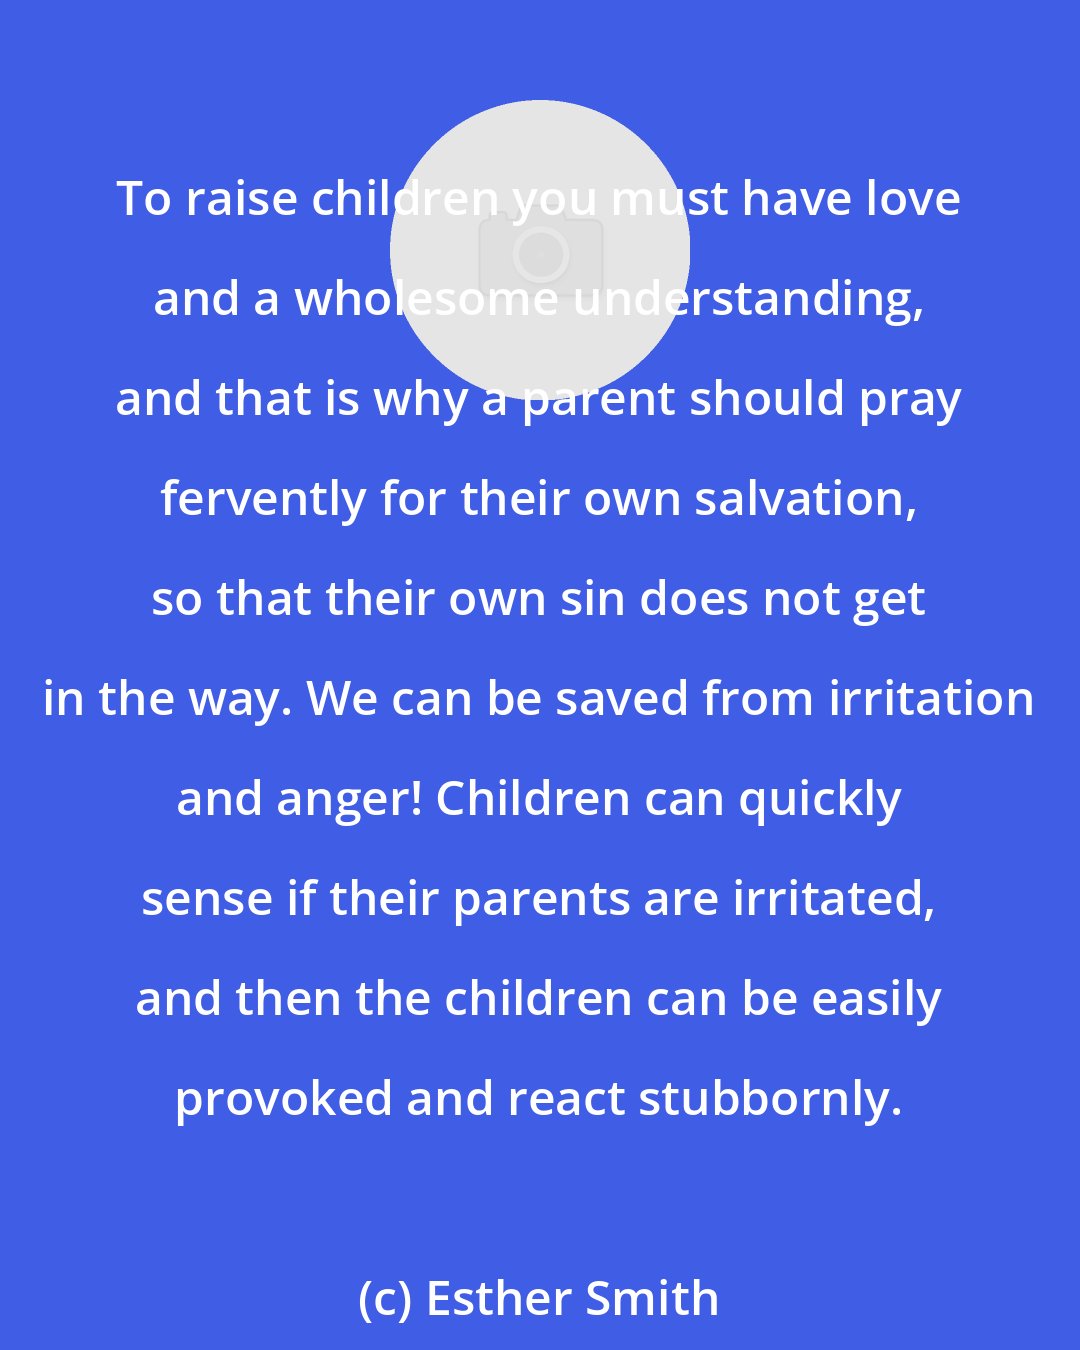 Esther Smith: To raise children you must have love and a wholesome understanding, and that is why a parent should pray fervently for their own salvation, so that their own sin does not get in the way. We can be saved from irritation and anger! Children can quickly sense if their parents are irritated, and then the children can be easily provoked and react stubbornly.